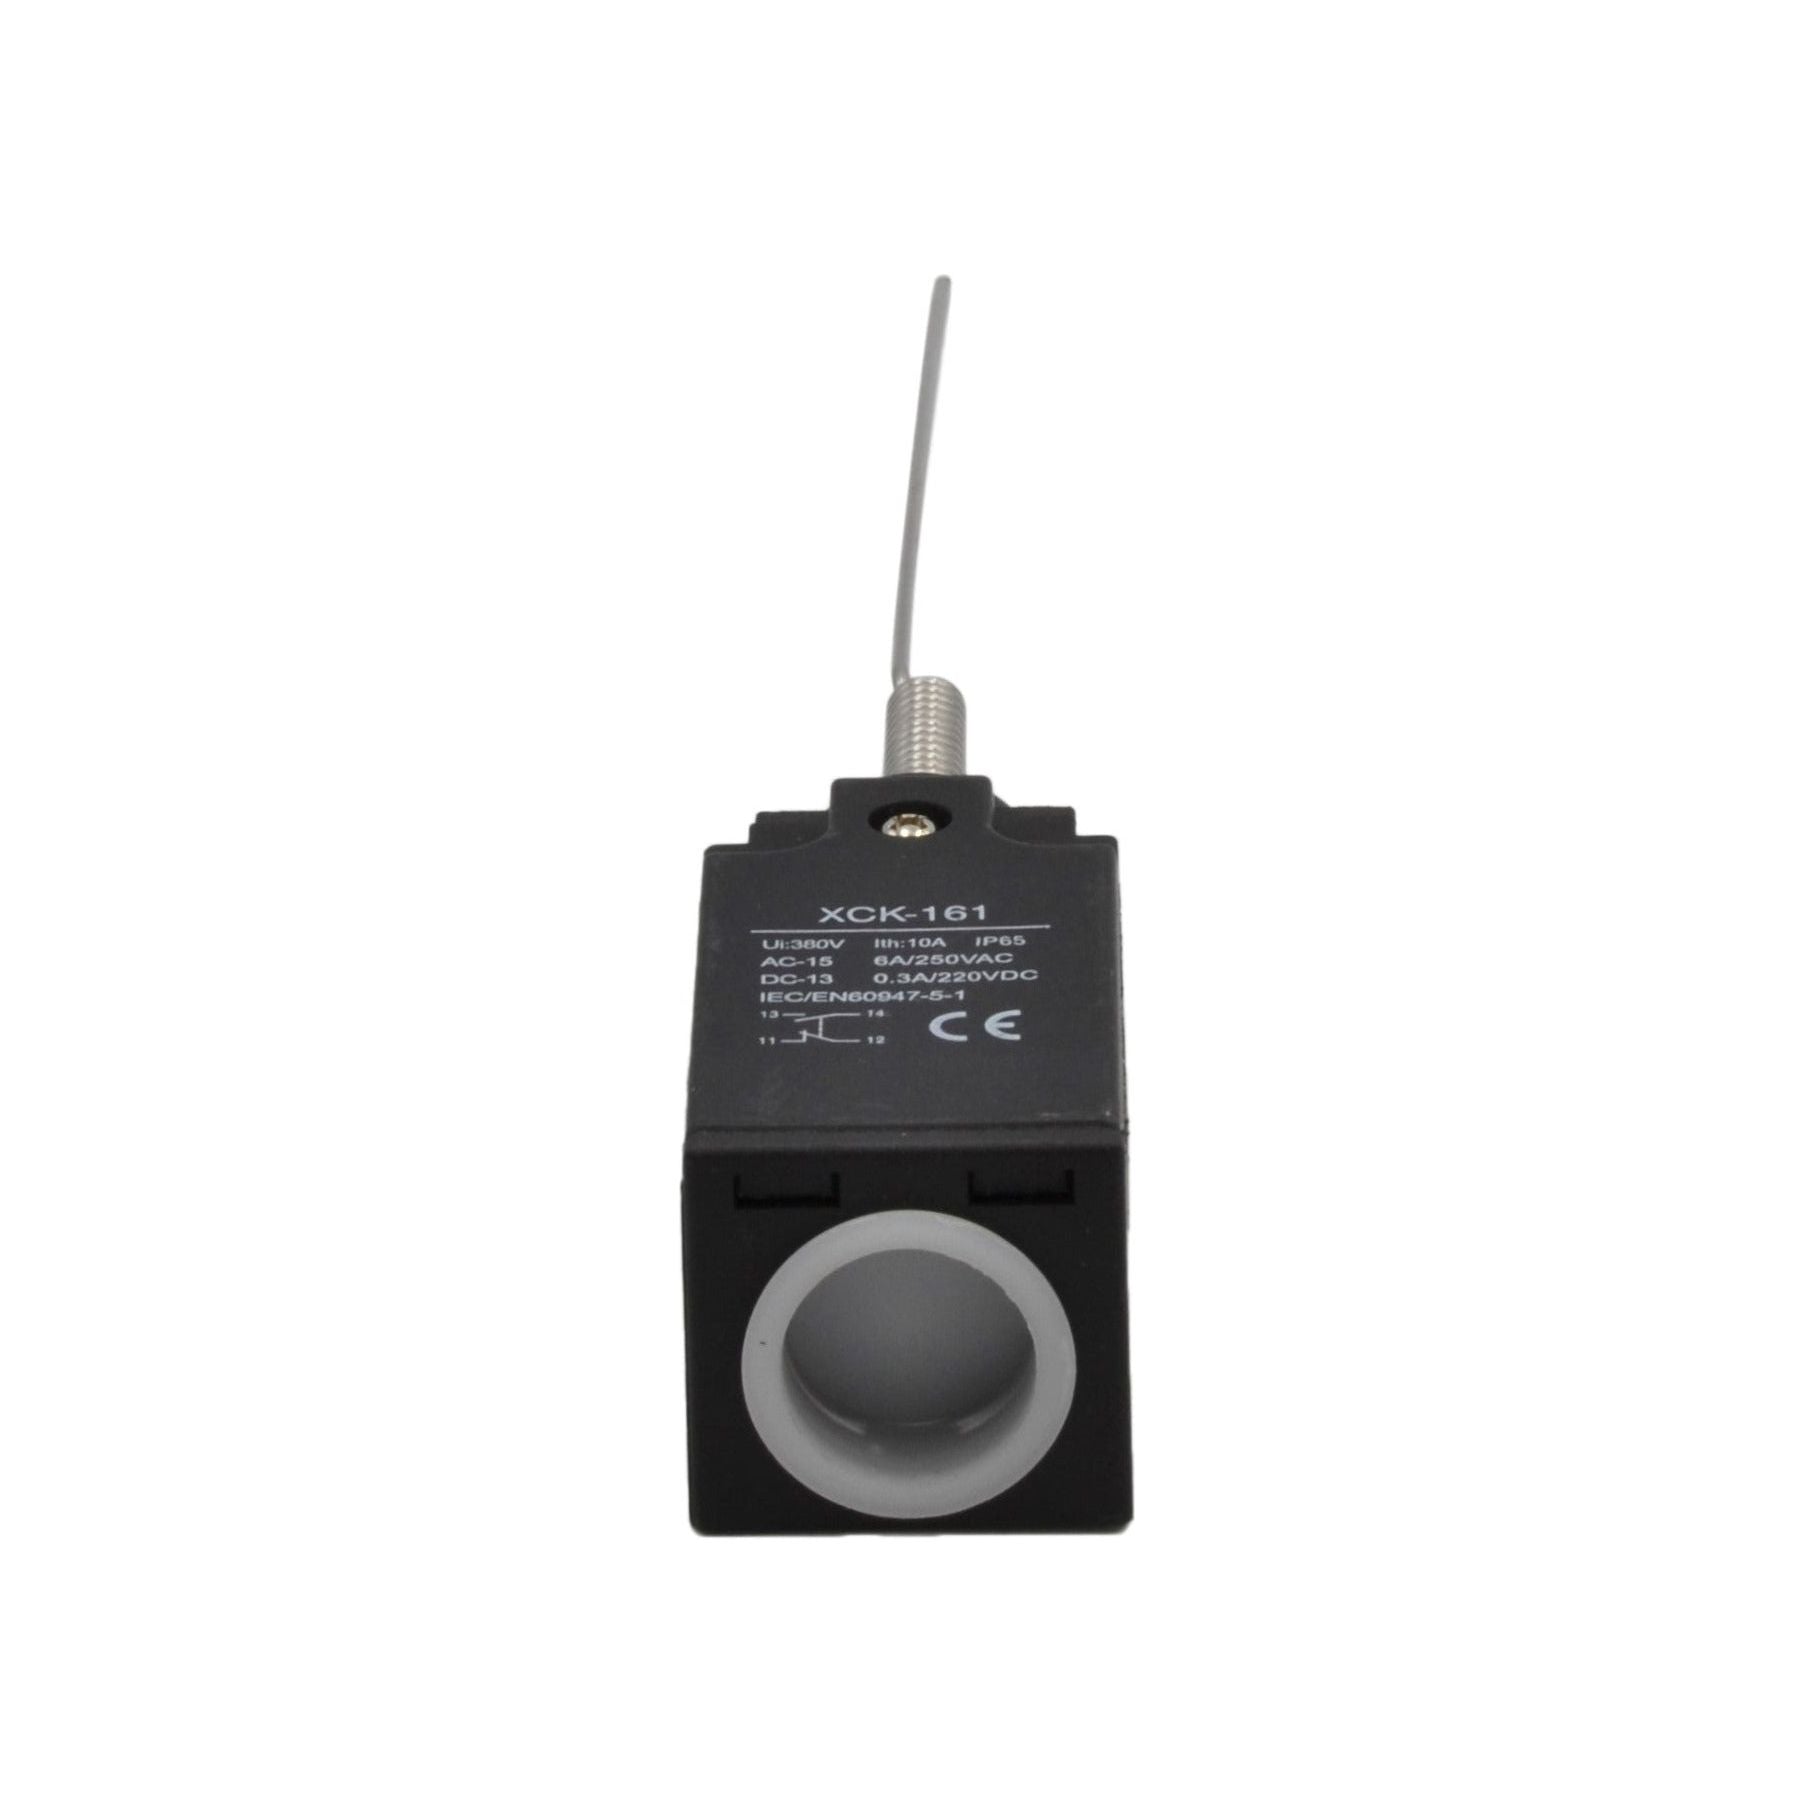 XCK-161 Spring Lever Actuator Limit Switch